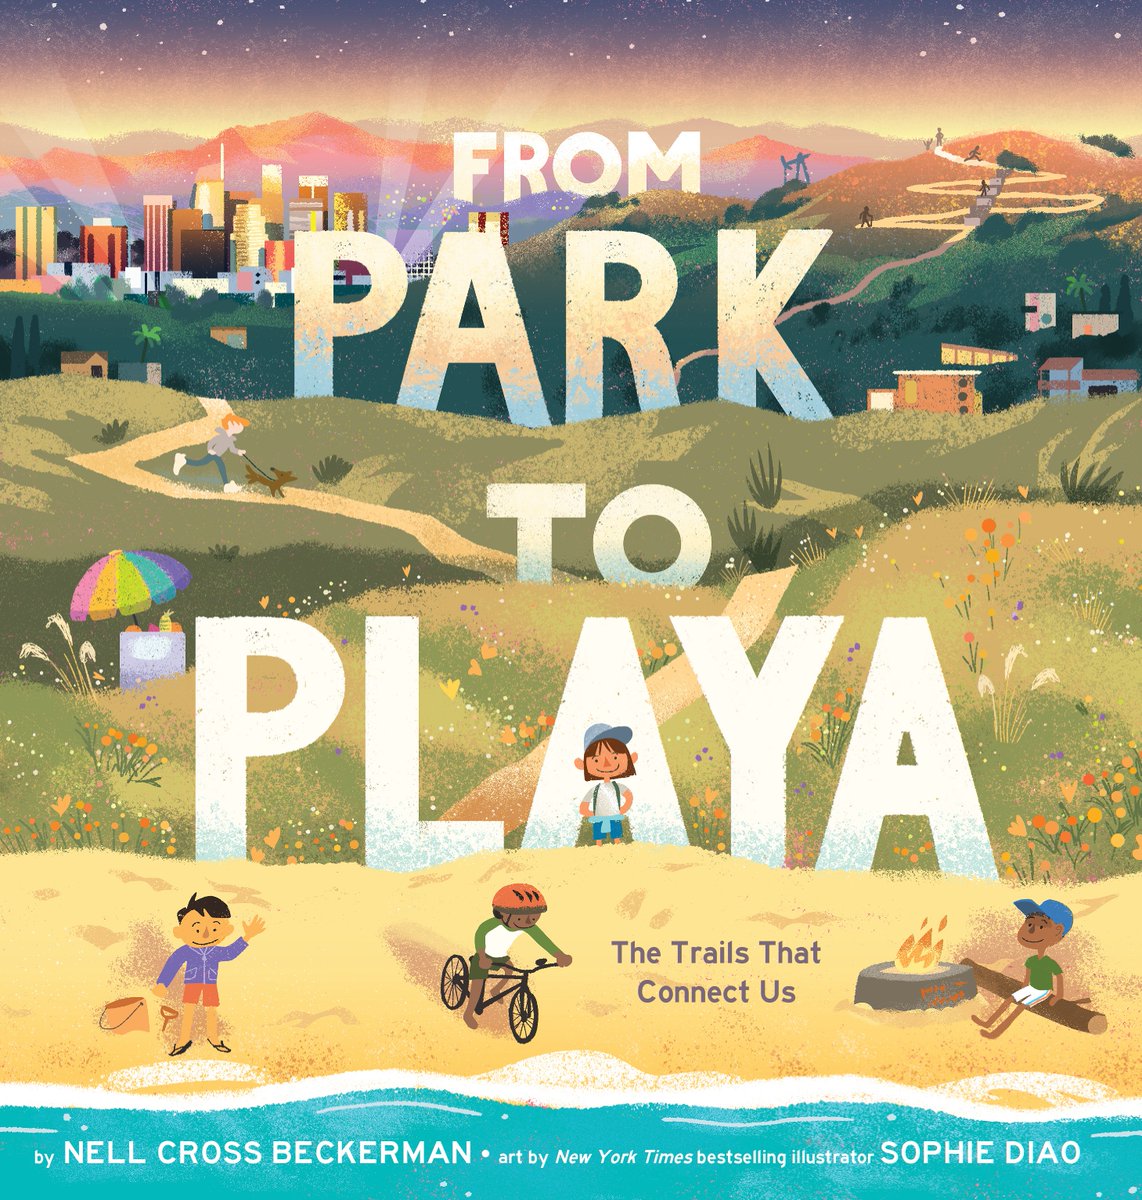 Explore the beauty of nature and community in #FromParkToPlaya by @NellBeckerman and @sophiediao! Pick up a copy of this joyful picture book and celebrate the journey from city parks to sandy beaches. Available now! #BookBirthday bit.ly/42HXfsb